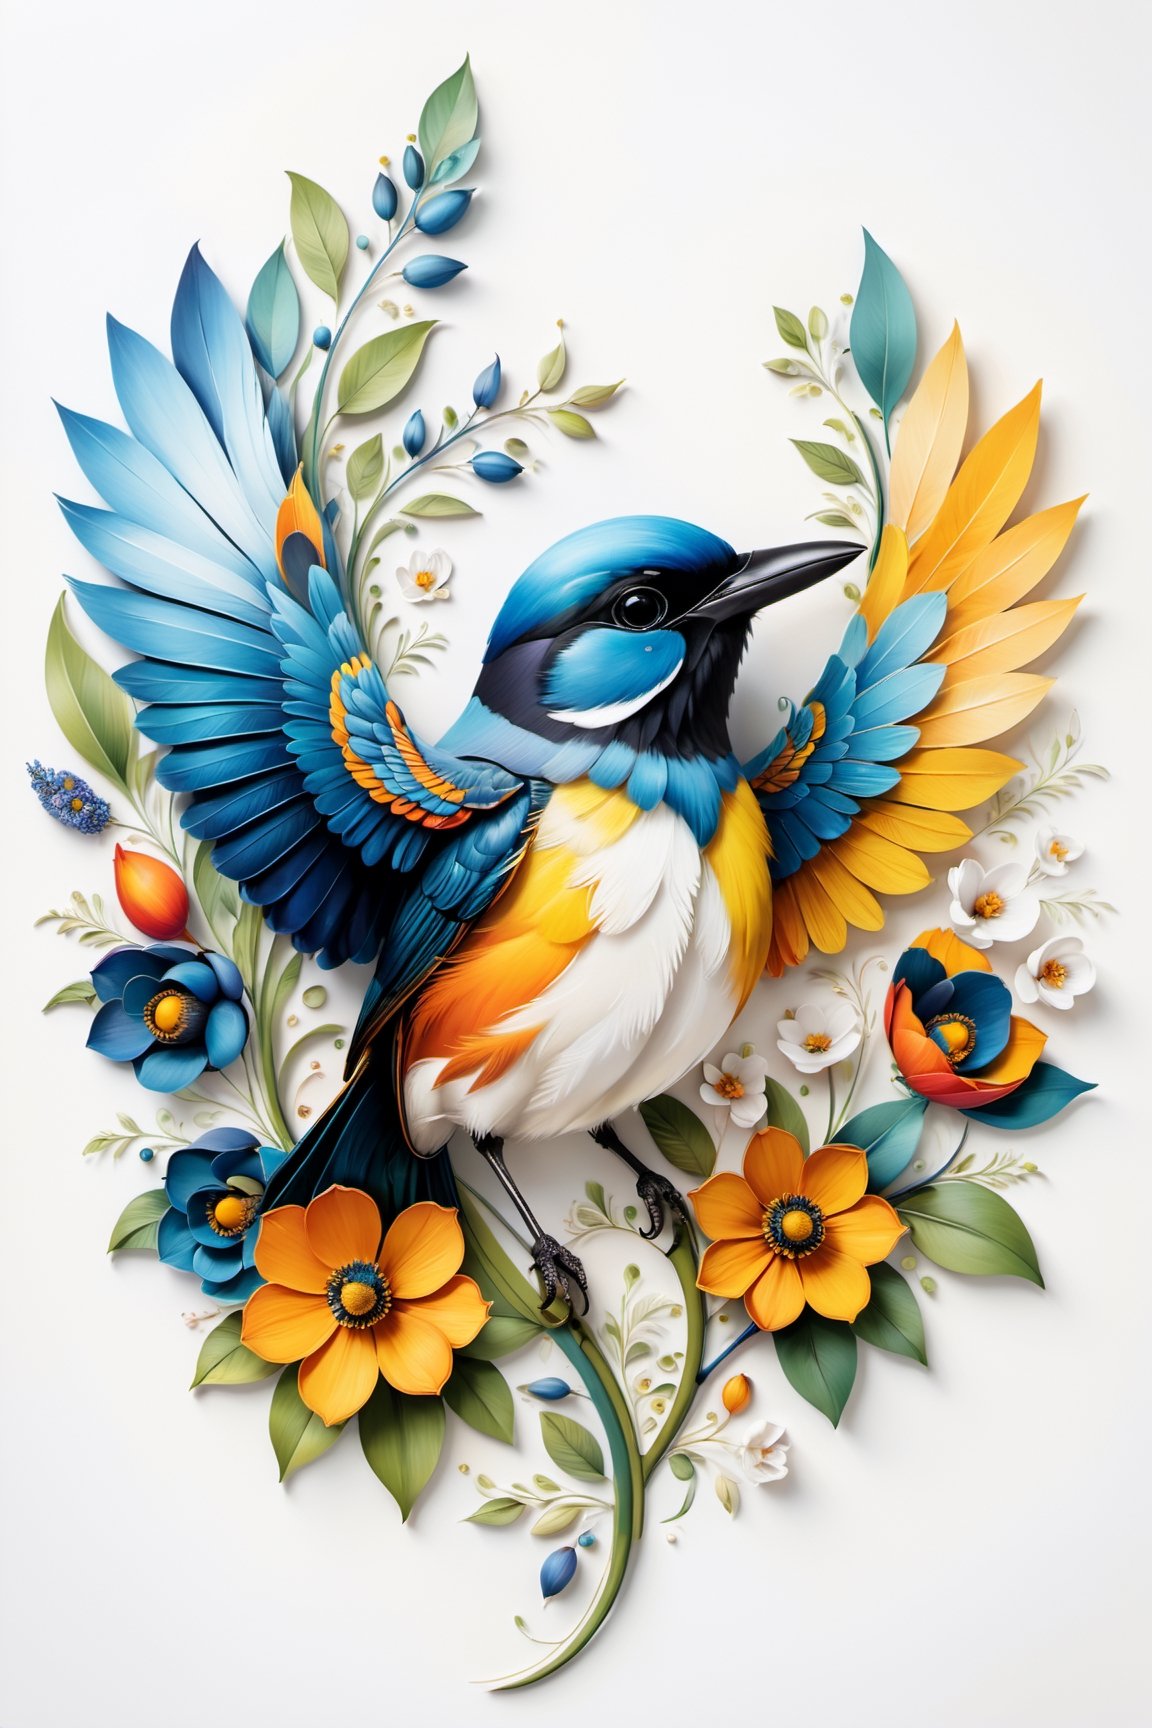 Draw a picture of an eye-catching bird and blend it with the perfect balance between art and nature, combining elements such as flowers, leaves, and other natural motifs to create unique and intricate designs with symmetry, perfect_symmetry, Leonardo style, ghost style, line_art, 3D style, white background